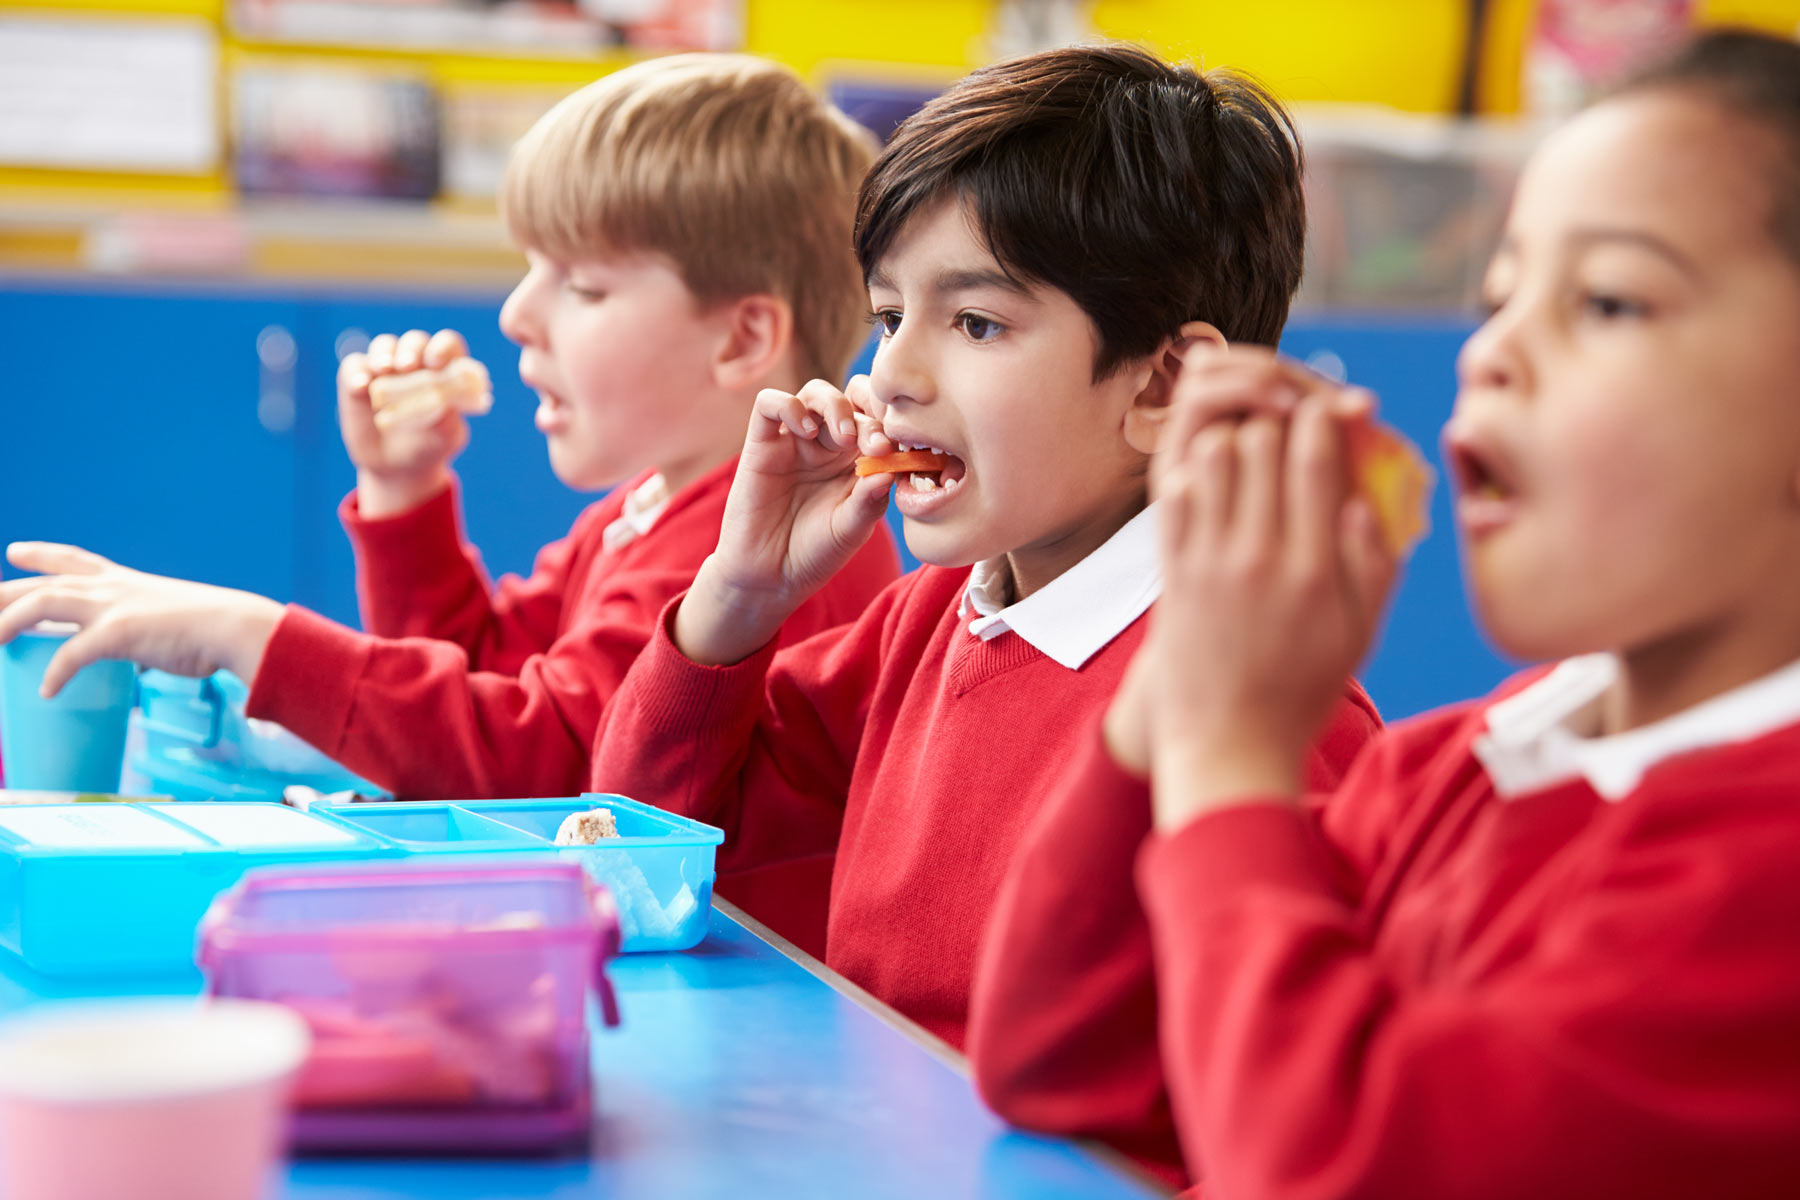 MAKE YOUR CHILD’S SCHOOL LUNCH BOX TOOTH FRIENDLY